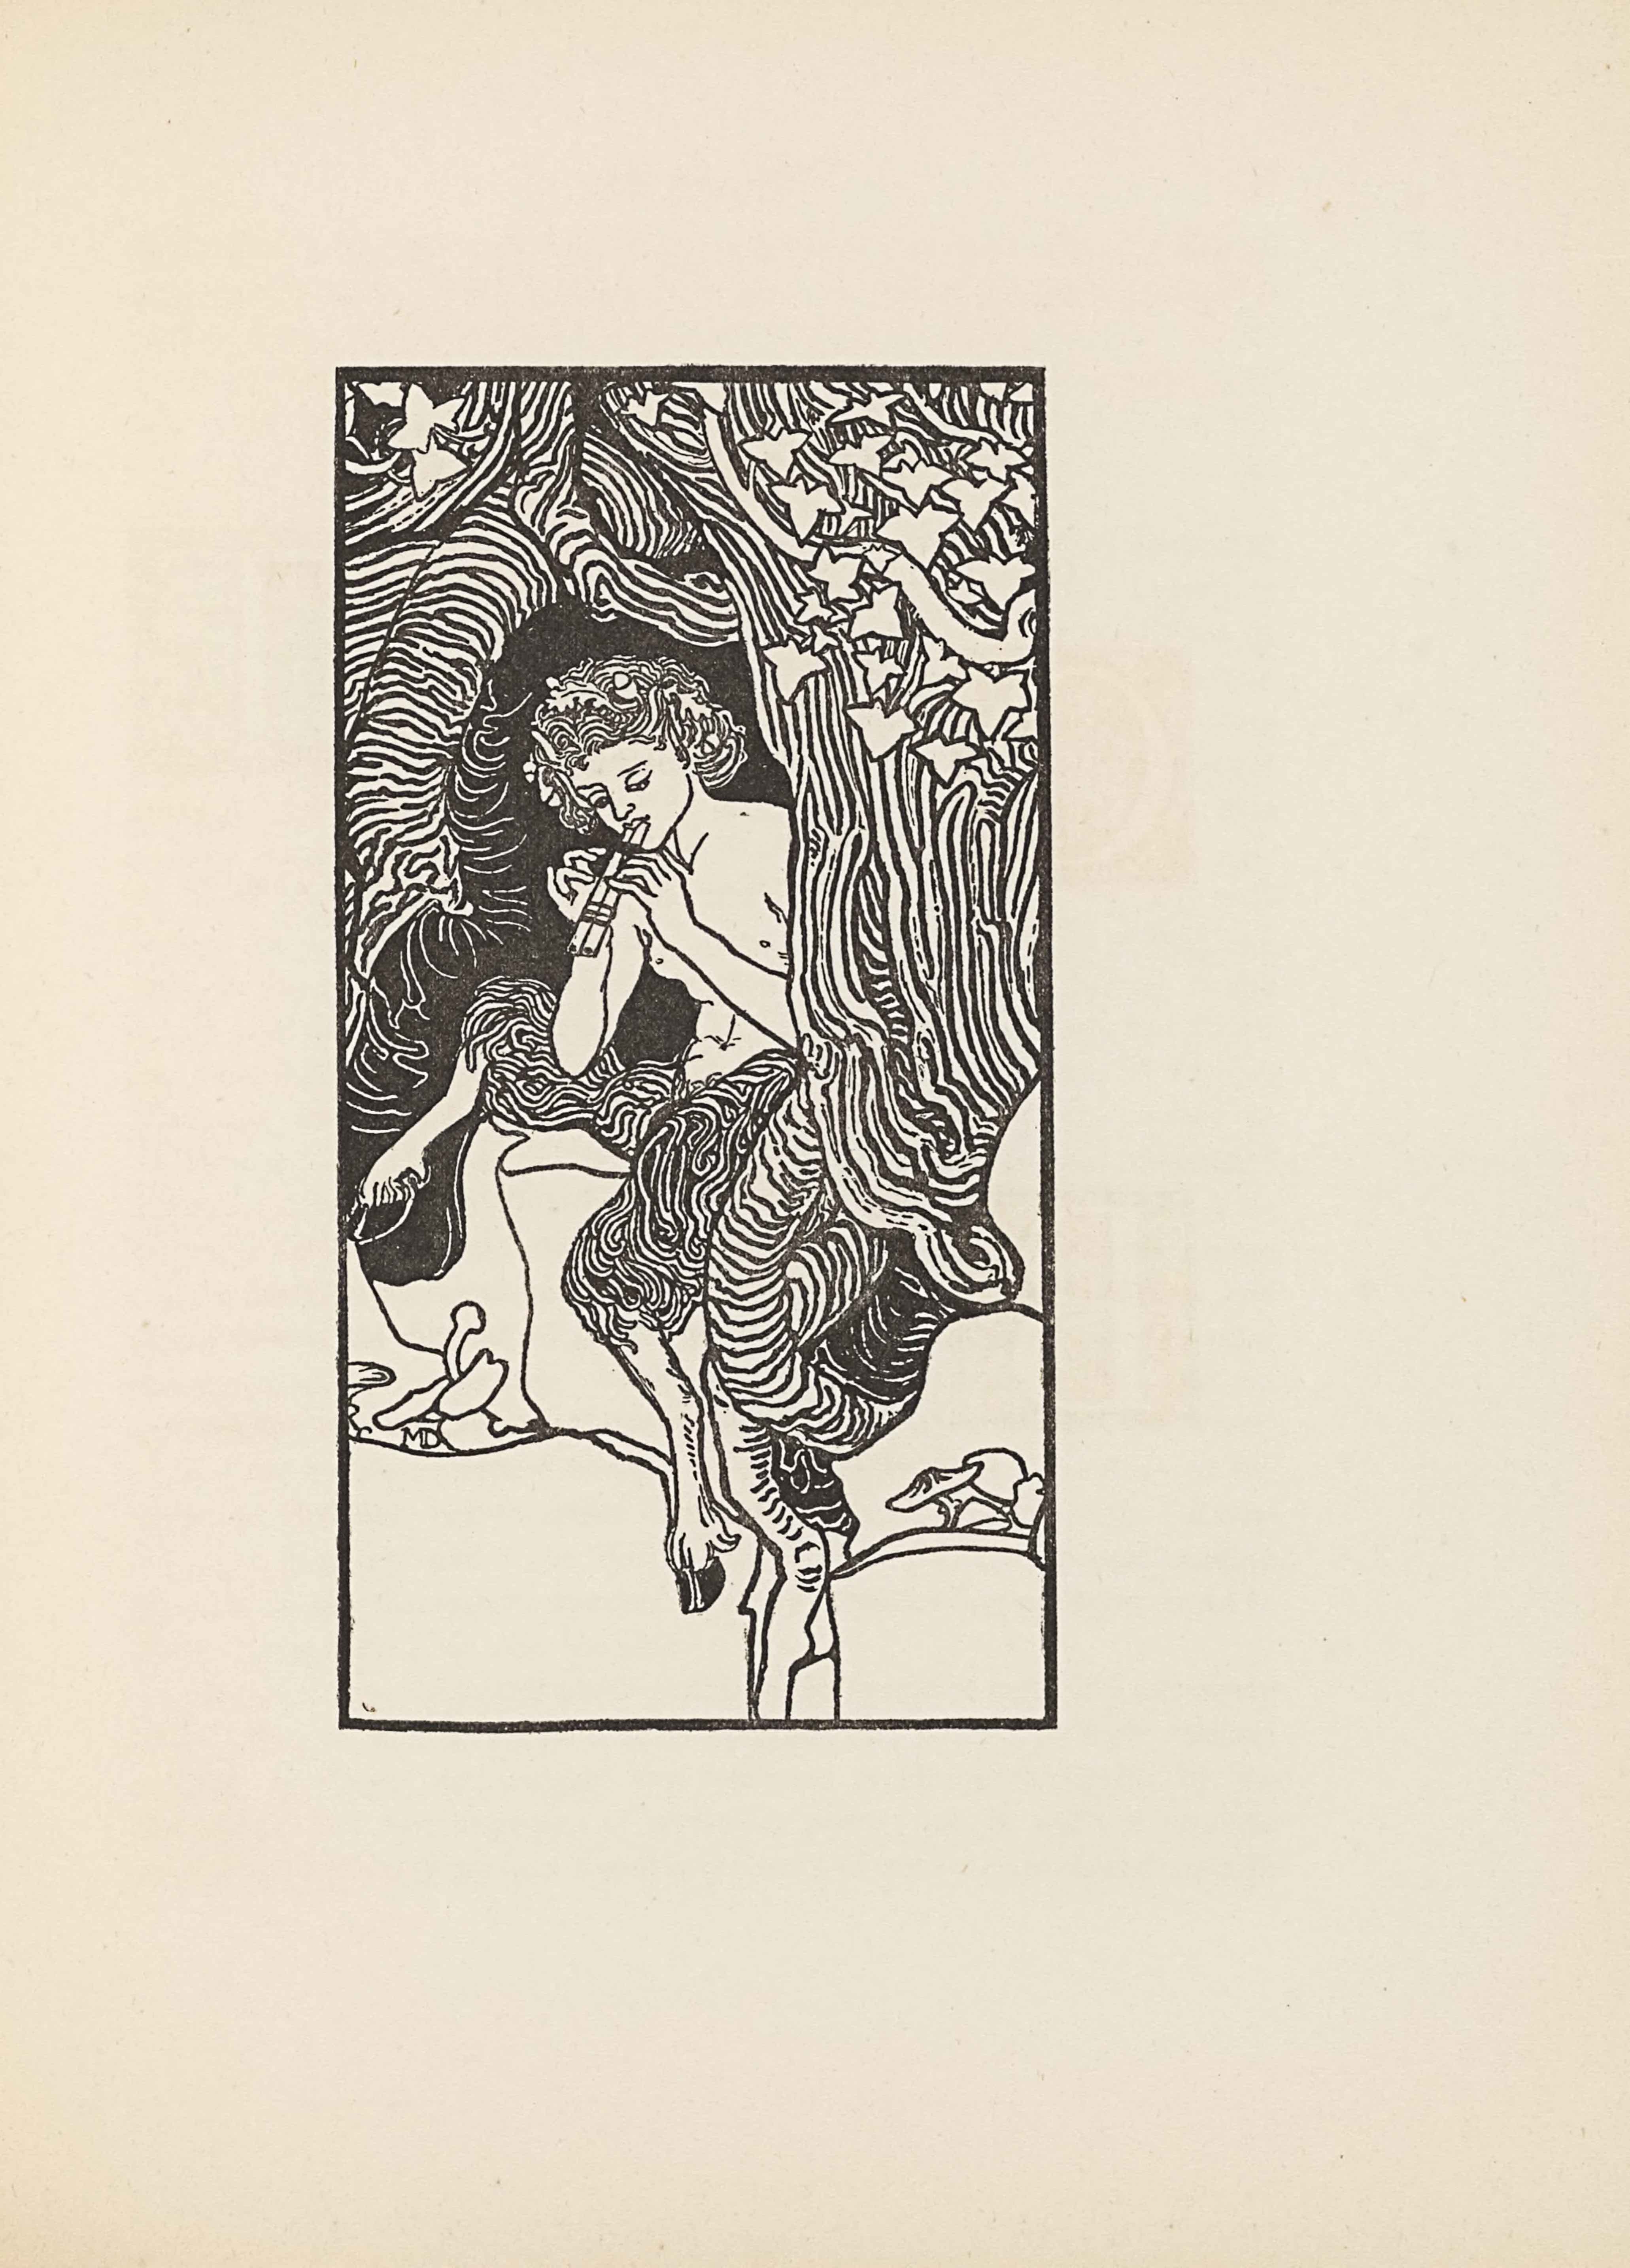 The line-block reproduction of Mabel Dearmer’s pen-and-ink drawing is bordered by a rectangular box in portrait orientation. The illustration is of a satyr or faun sitting on a stump in the hollow of a tree. He has a wreath of leaves in his hair and is playing panpipes. The tree has roots that spiral around the satyr and descend into the ground by his left hoof. There are mushrooms on both sides of the the trunk, sprouting from the ground. The artist’s initials are tucked under a mushroom on the left side of the page, they read: “MD” [caps]. In the bottom third of the image is open space. The surrounding tree is composed of distinct lines that often run parallel to one another. In the top third of the illustration, the wood is covered in white ivy leaves.